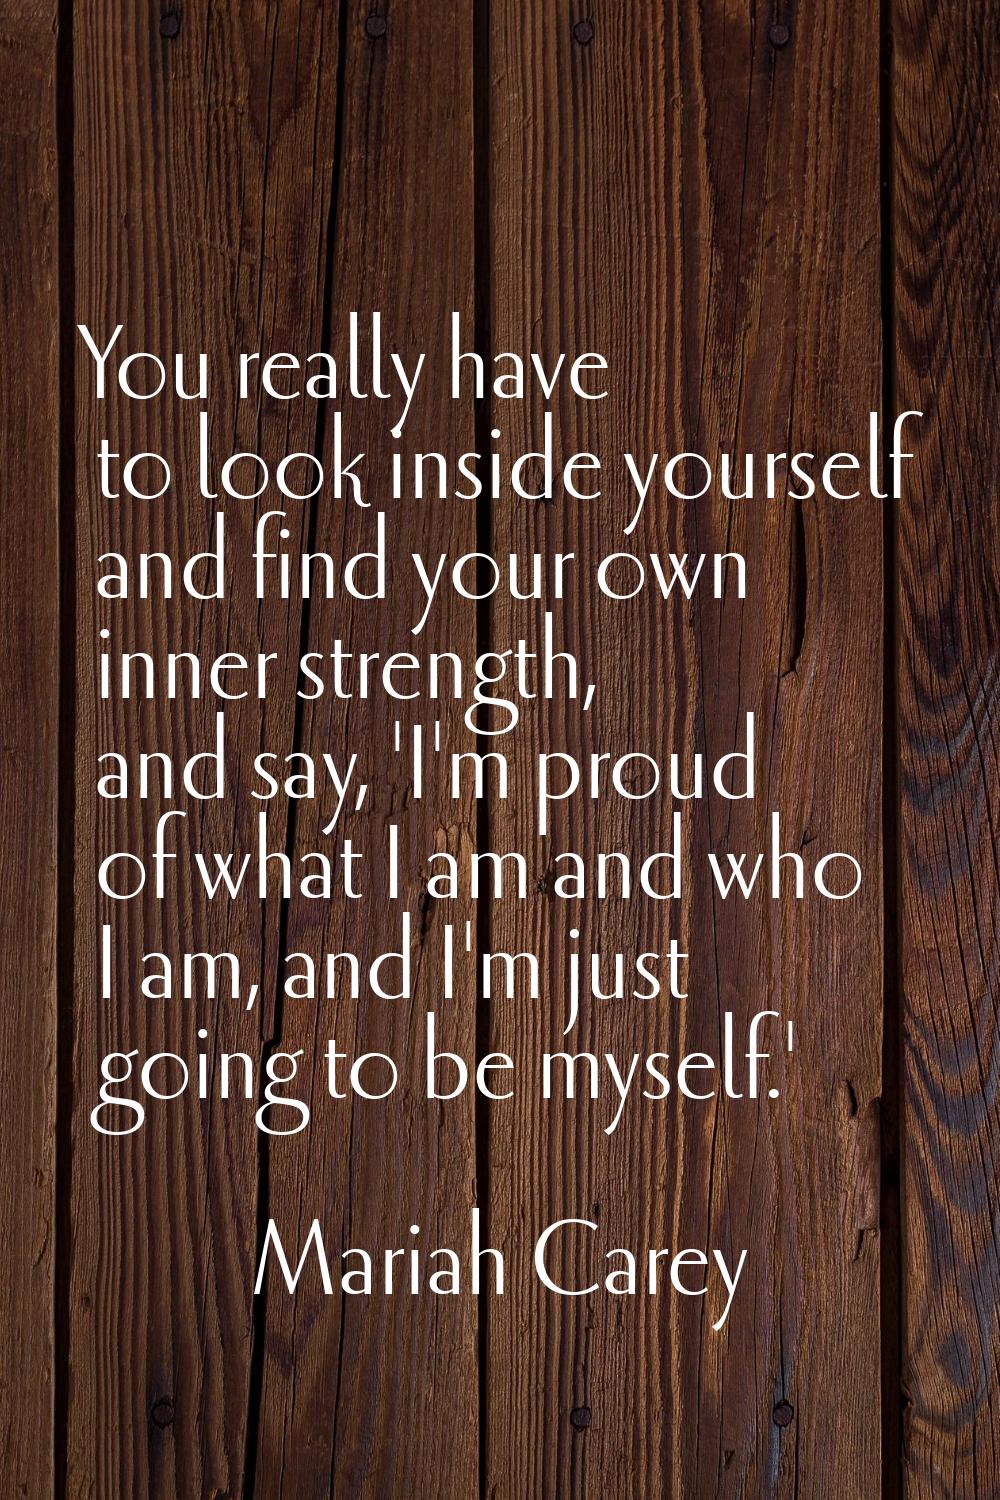 You really have to look inside yourself and find your own inner strength, and say, 'I'm proud of wh